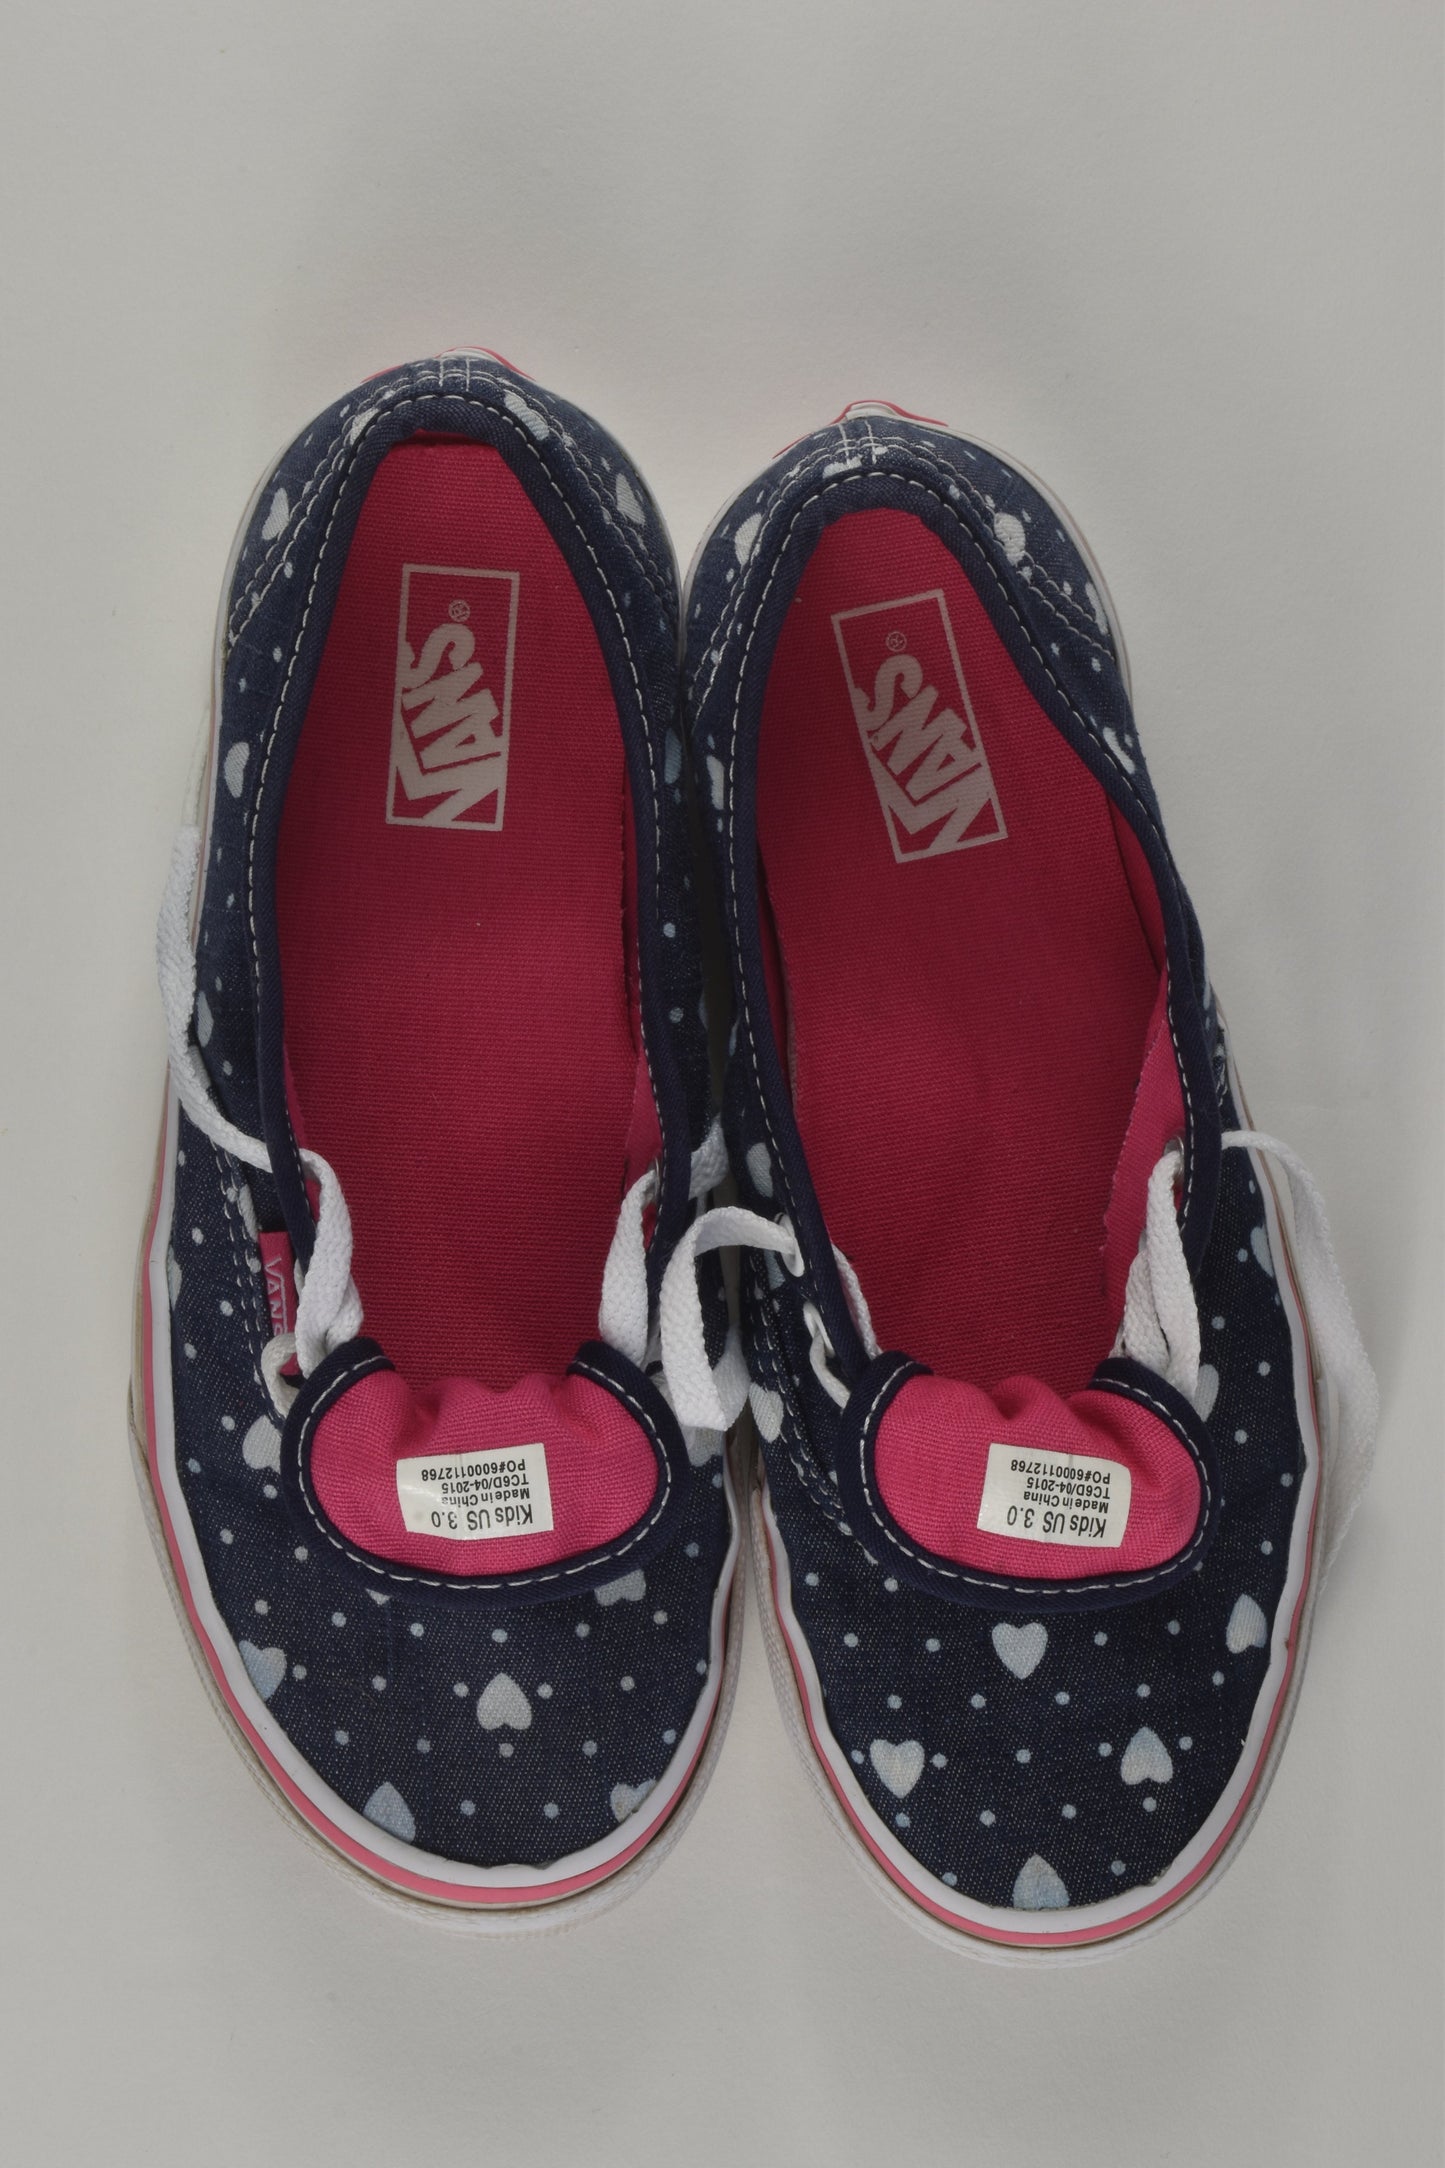 Vans of the Wall Size US 3 Shoes